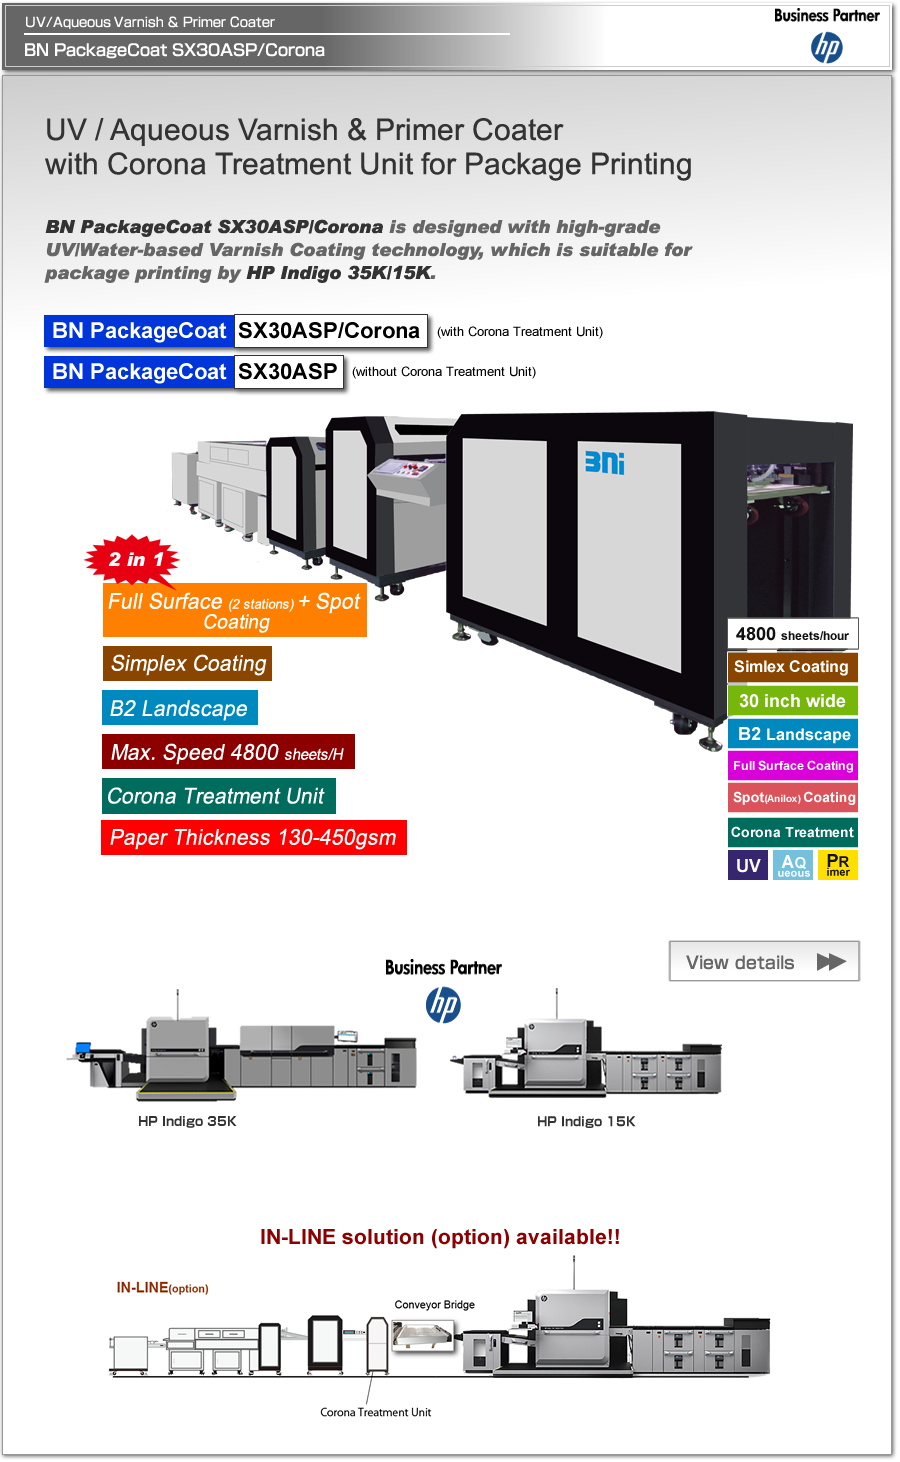 BN PackageCoat SX30ASP/Corona is Coater for Package Printing, which has two in one coating system, full surface coating with 2 stations and spot coating, for Primer coating as pre-processing before printing and UV, Water-based Liquid coating after printing, for Indigo 35K/15K Digital Press.